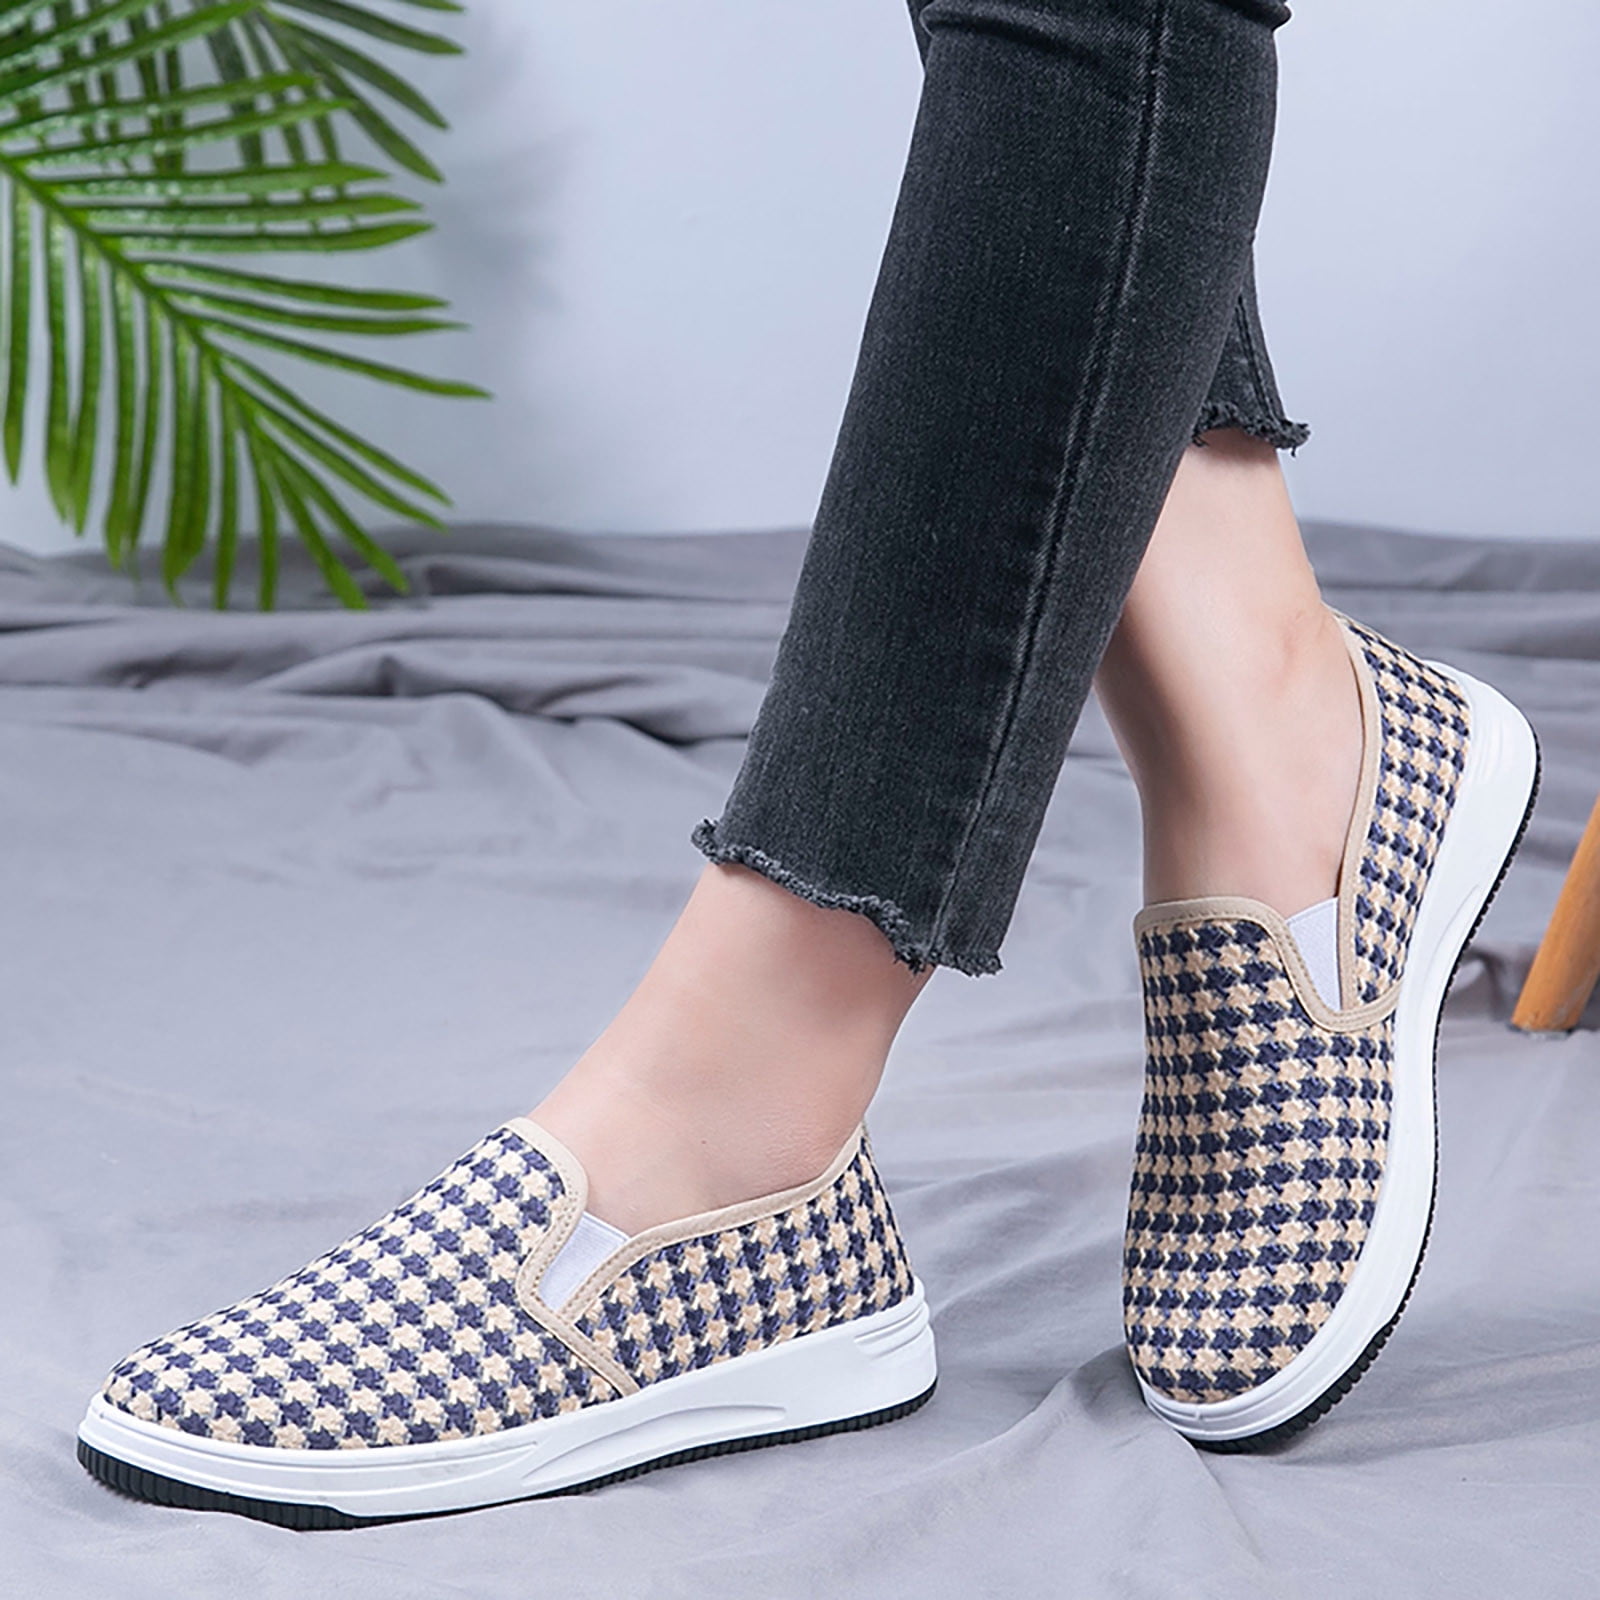 $23.49 for Women's Slip-on Yoga Shoes (a $55 Value)